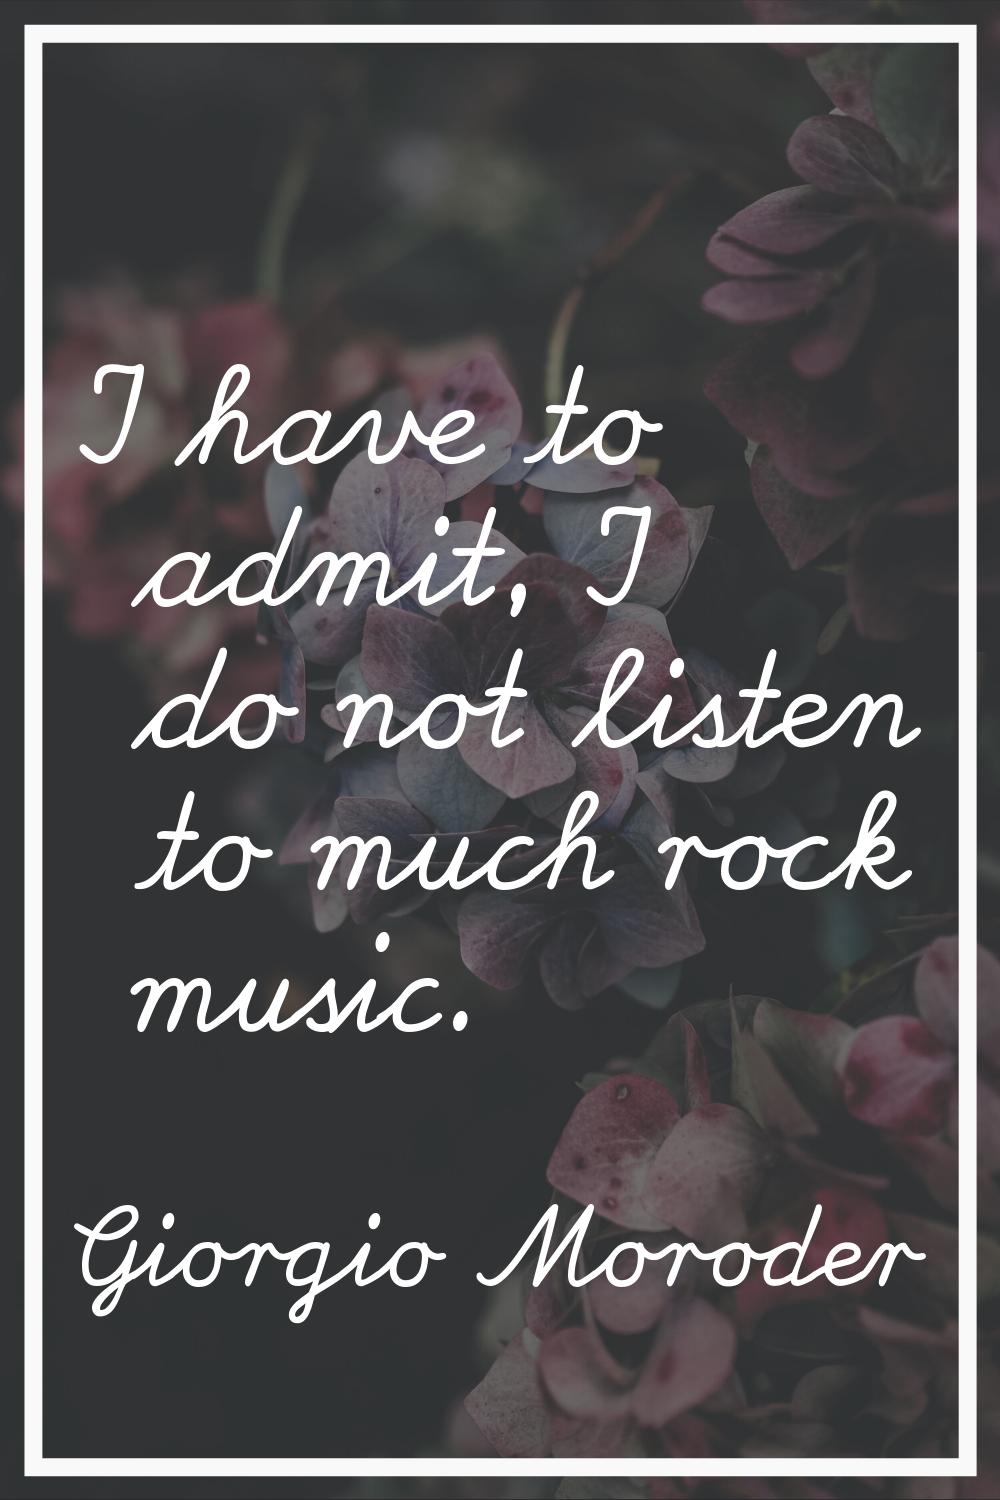 I have to admit, I do not listen to much rock music.